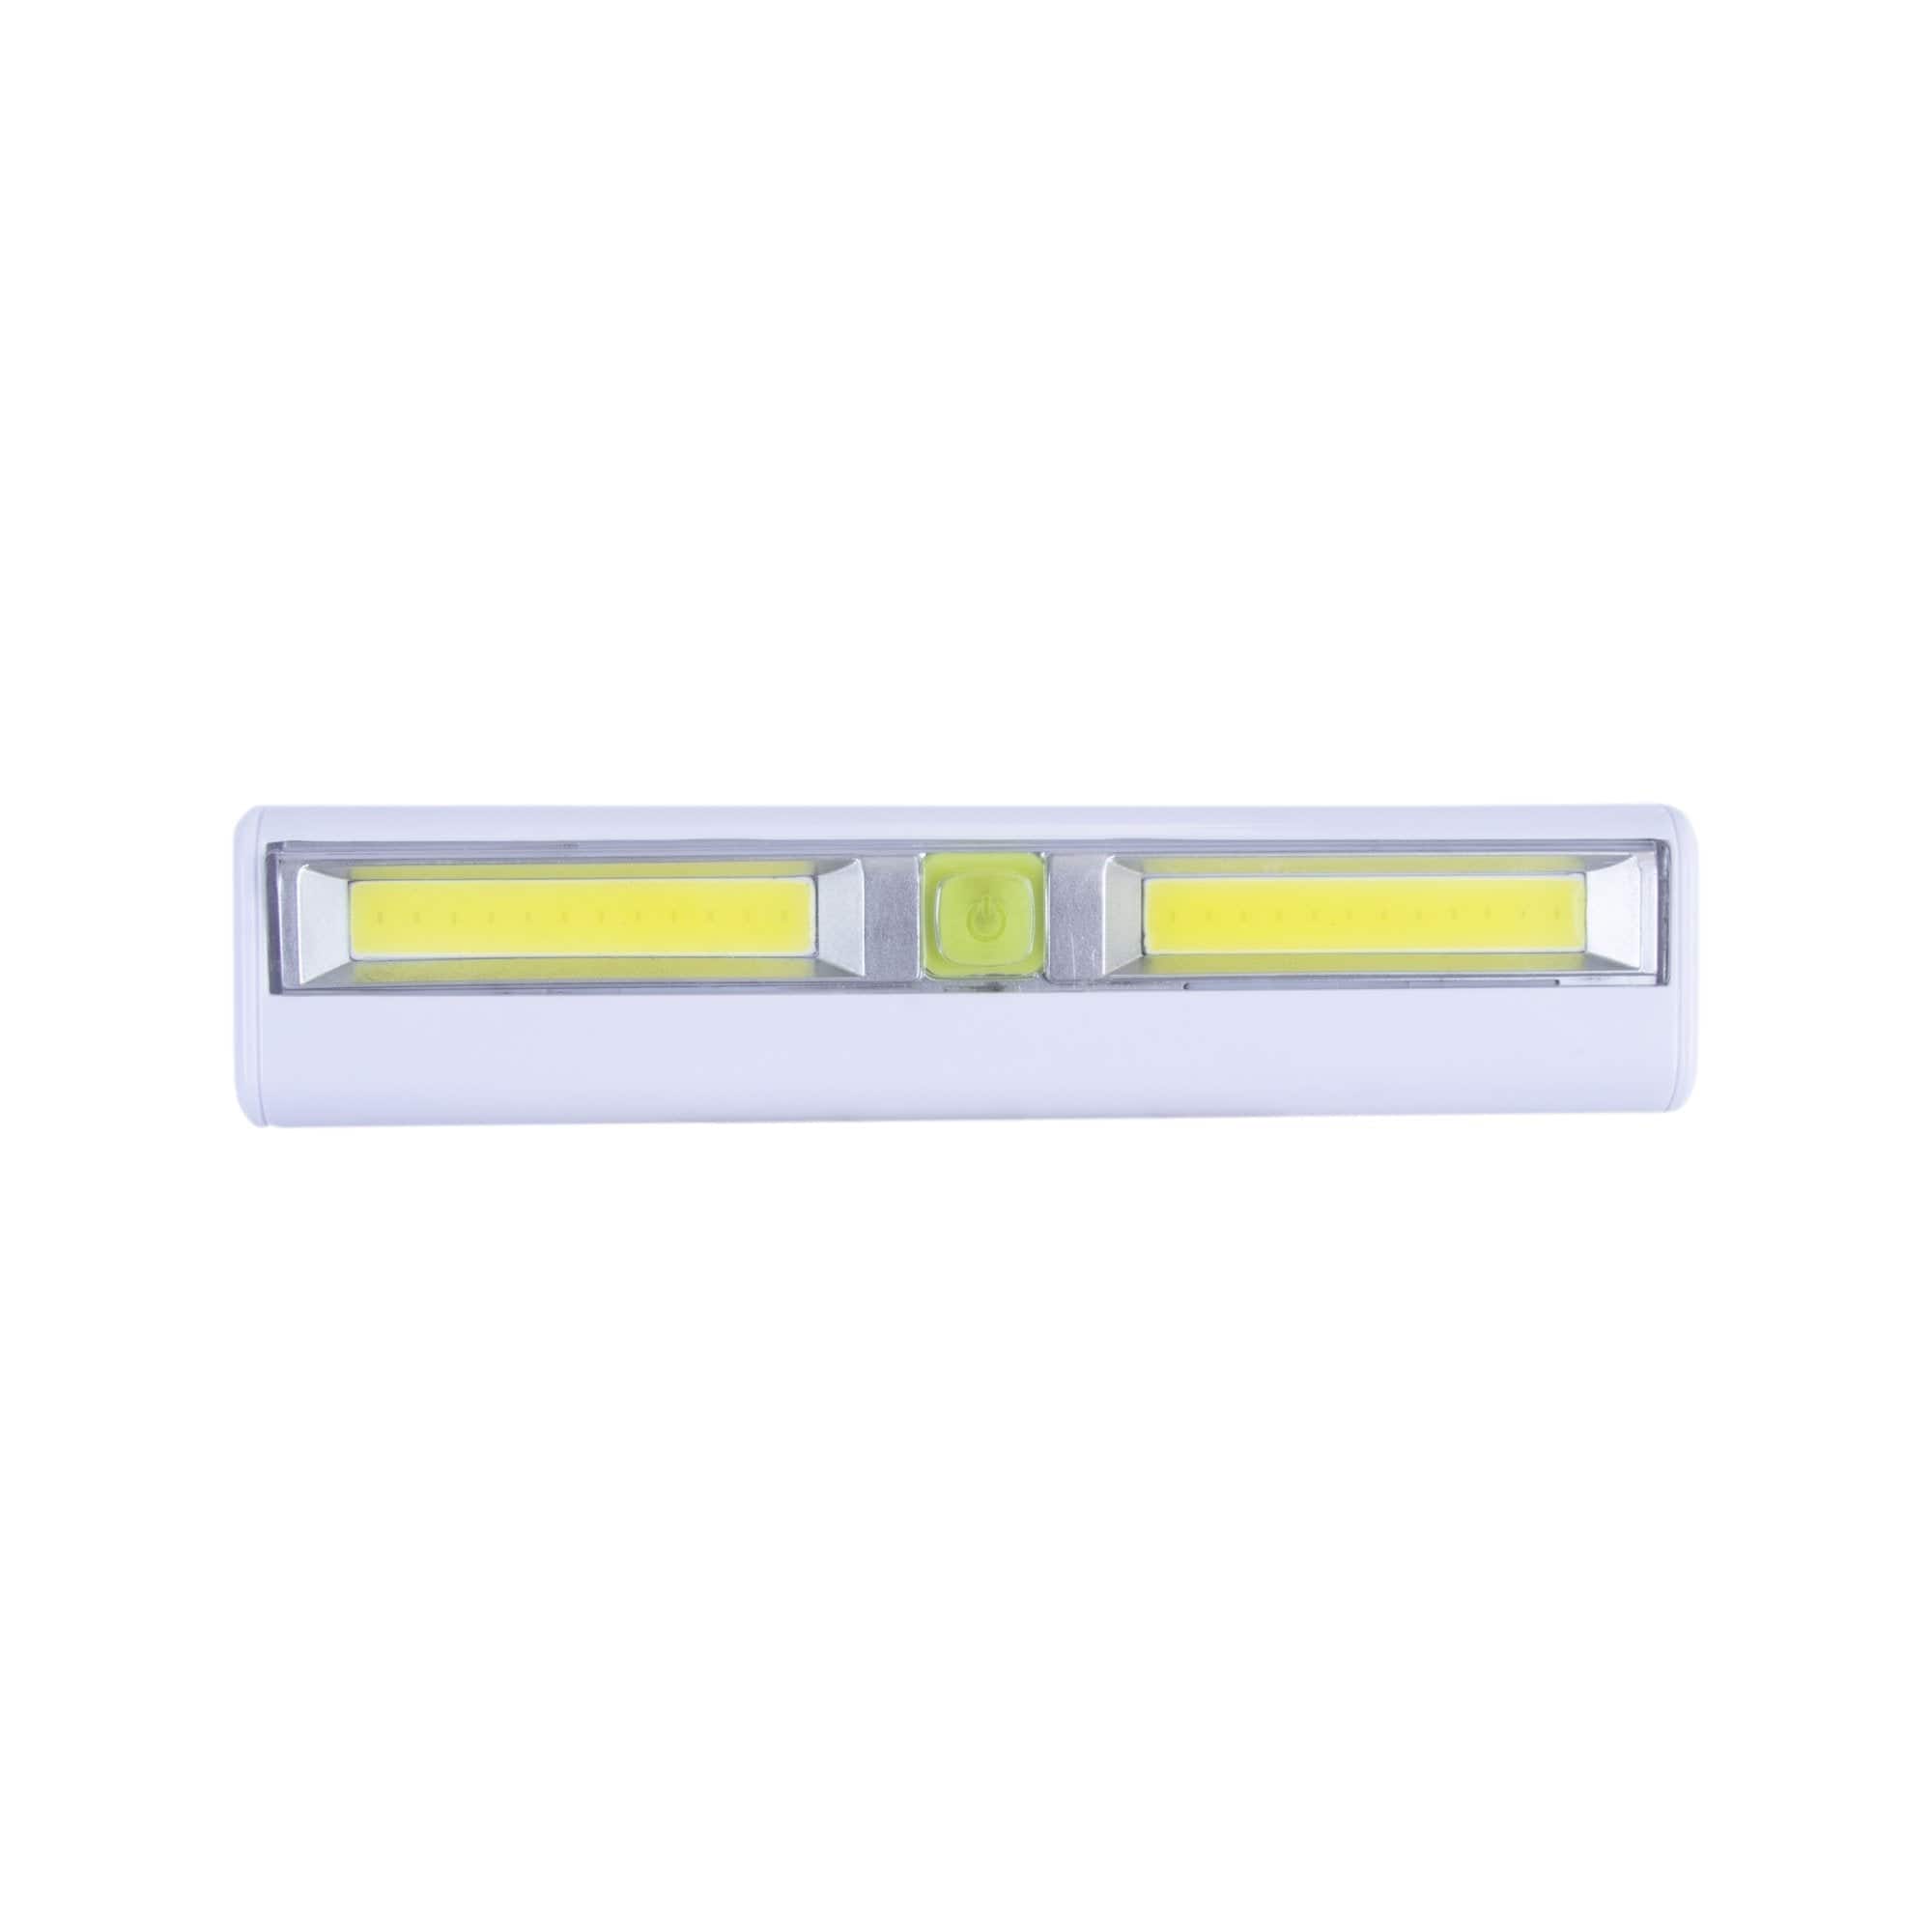 Brillar Electrical Remote Controlled Light Bars 2pk BR0019